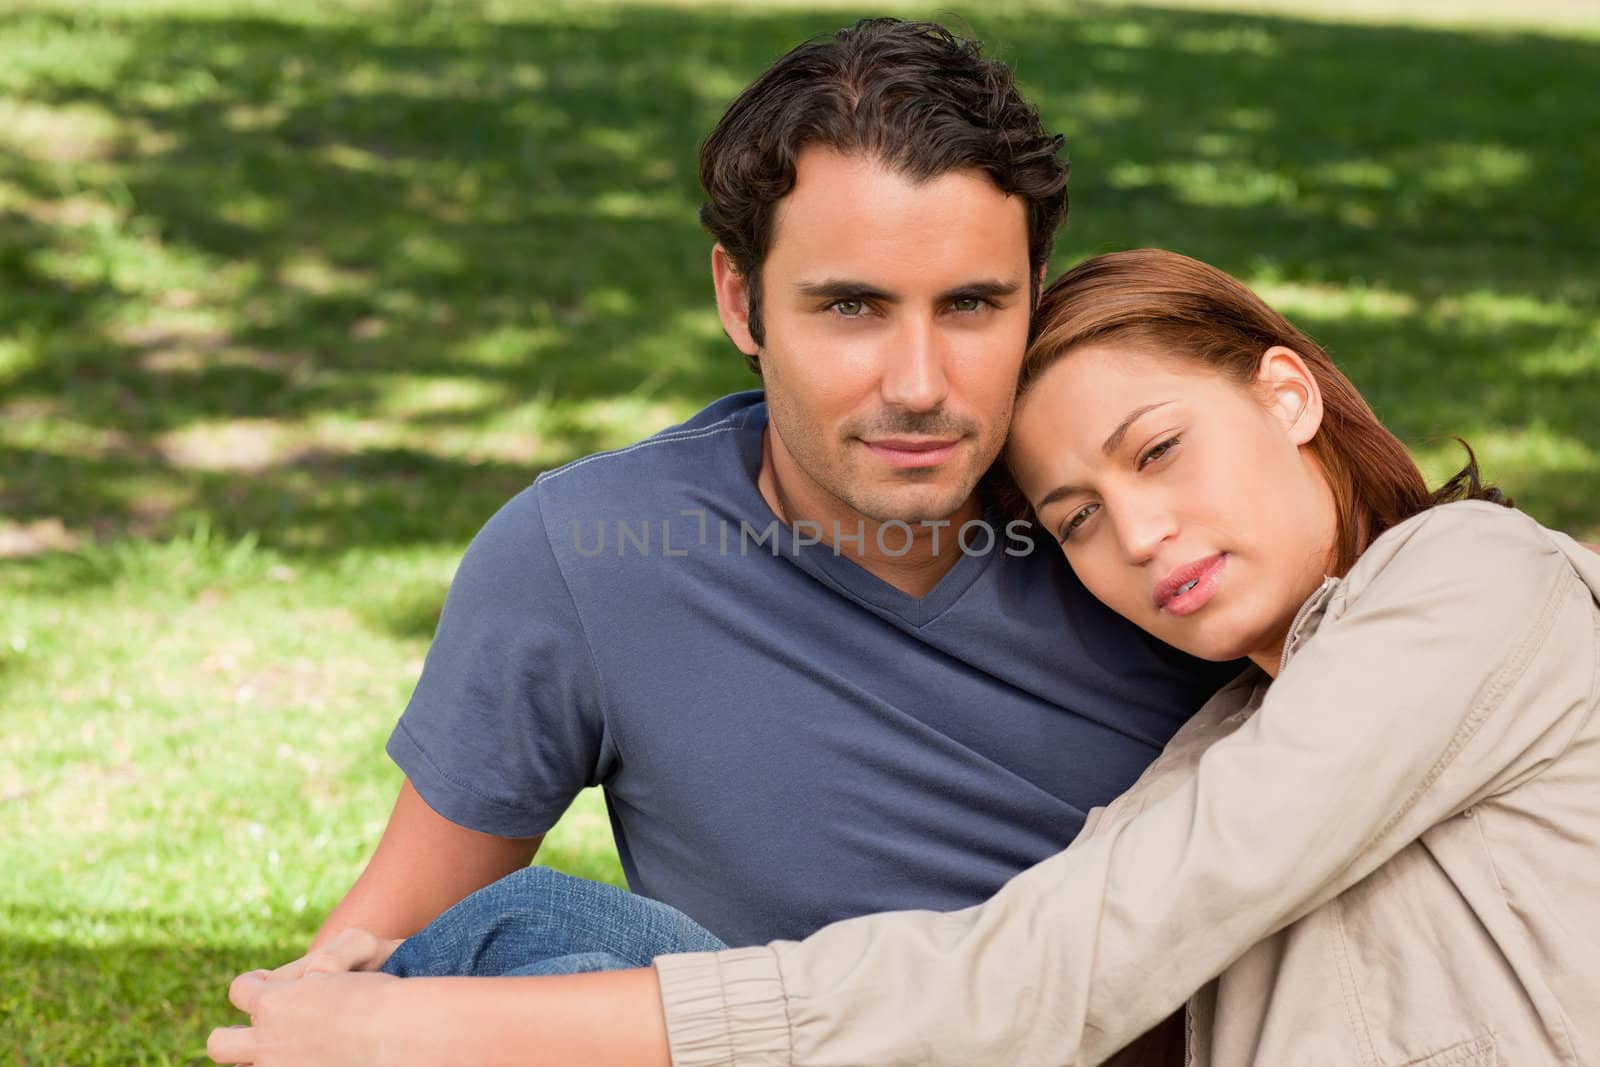 Man looking towards the sky with his friend who is resting her head on his shoulder as the sit on the grass